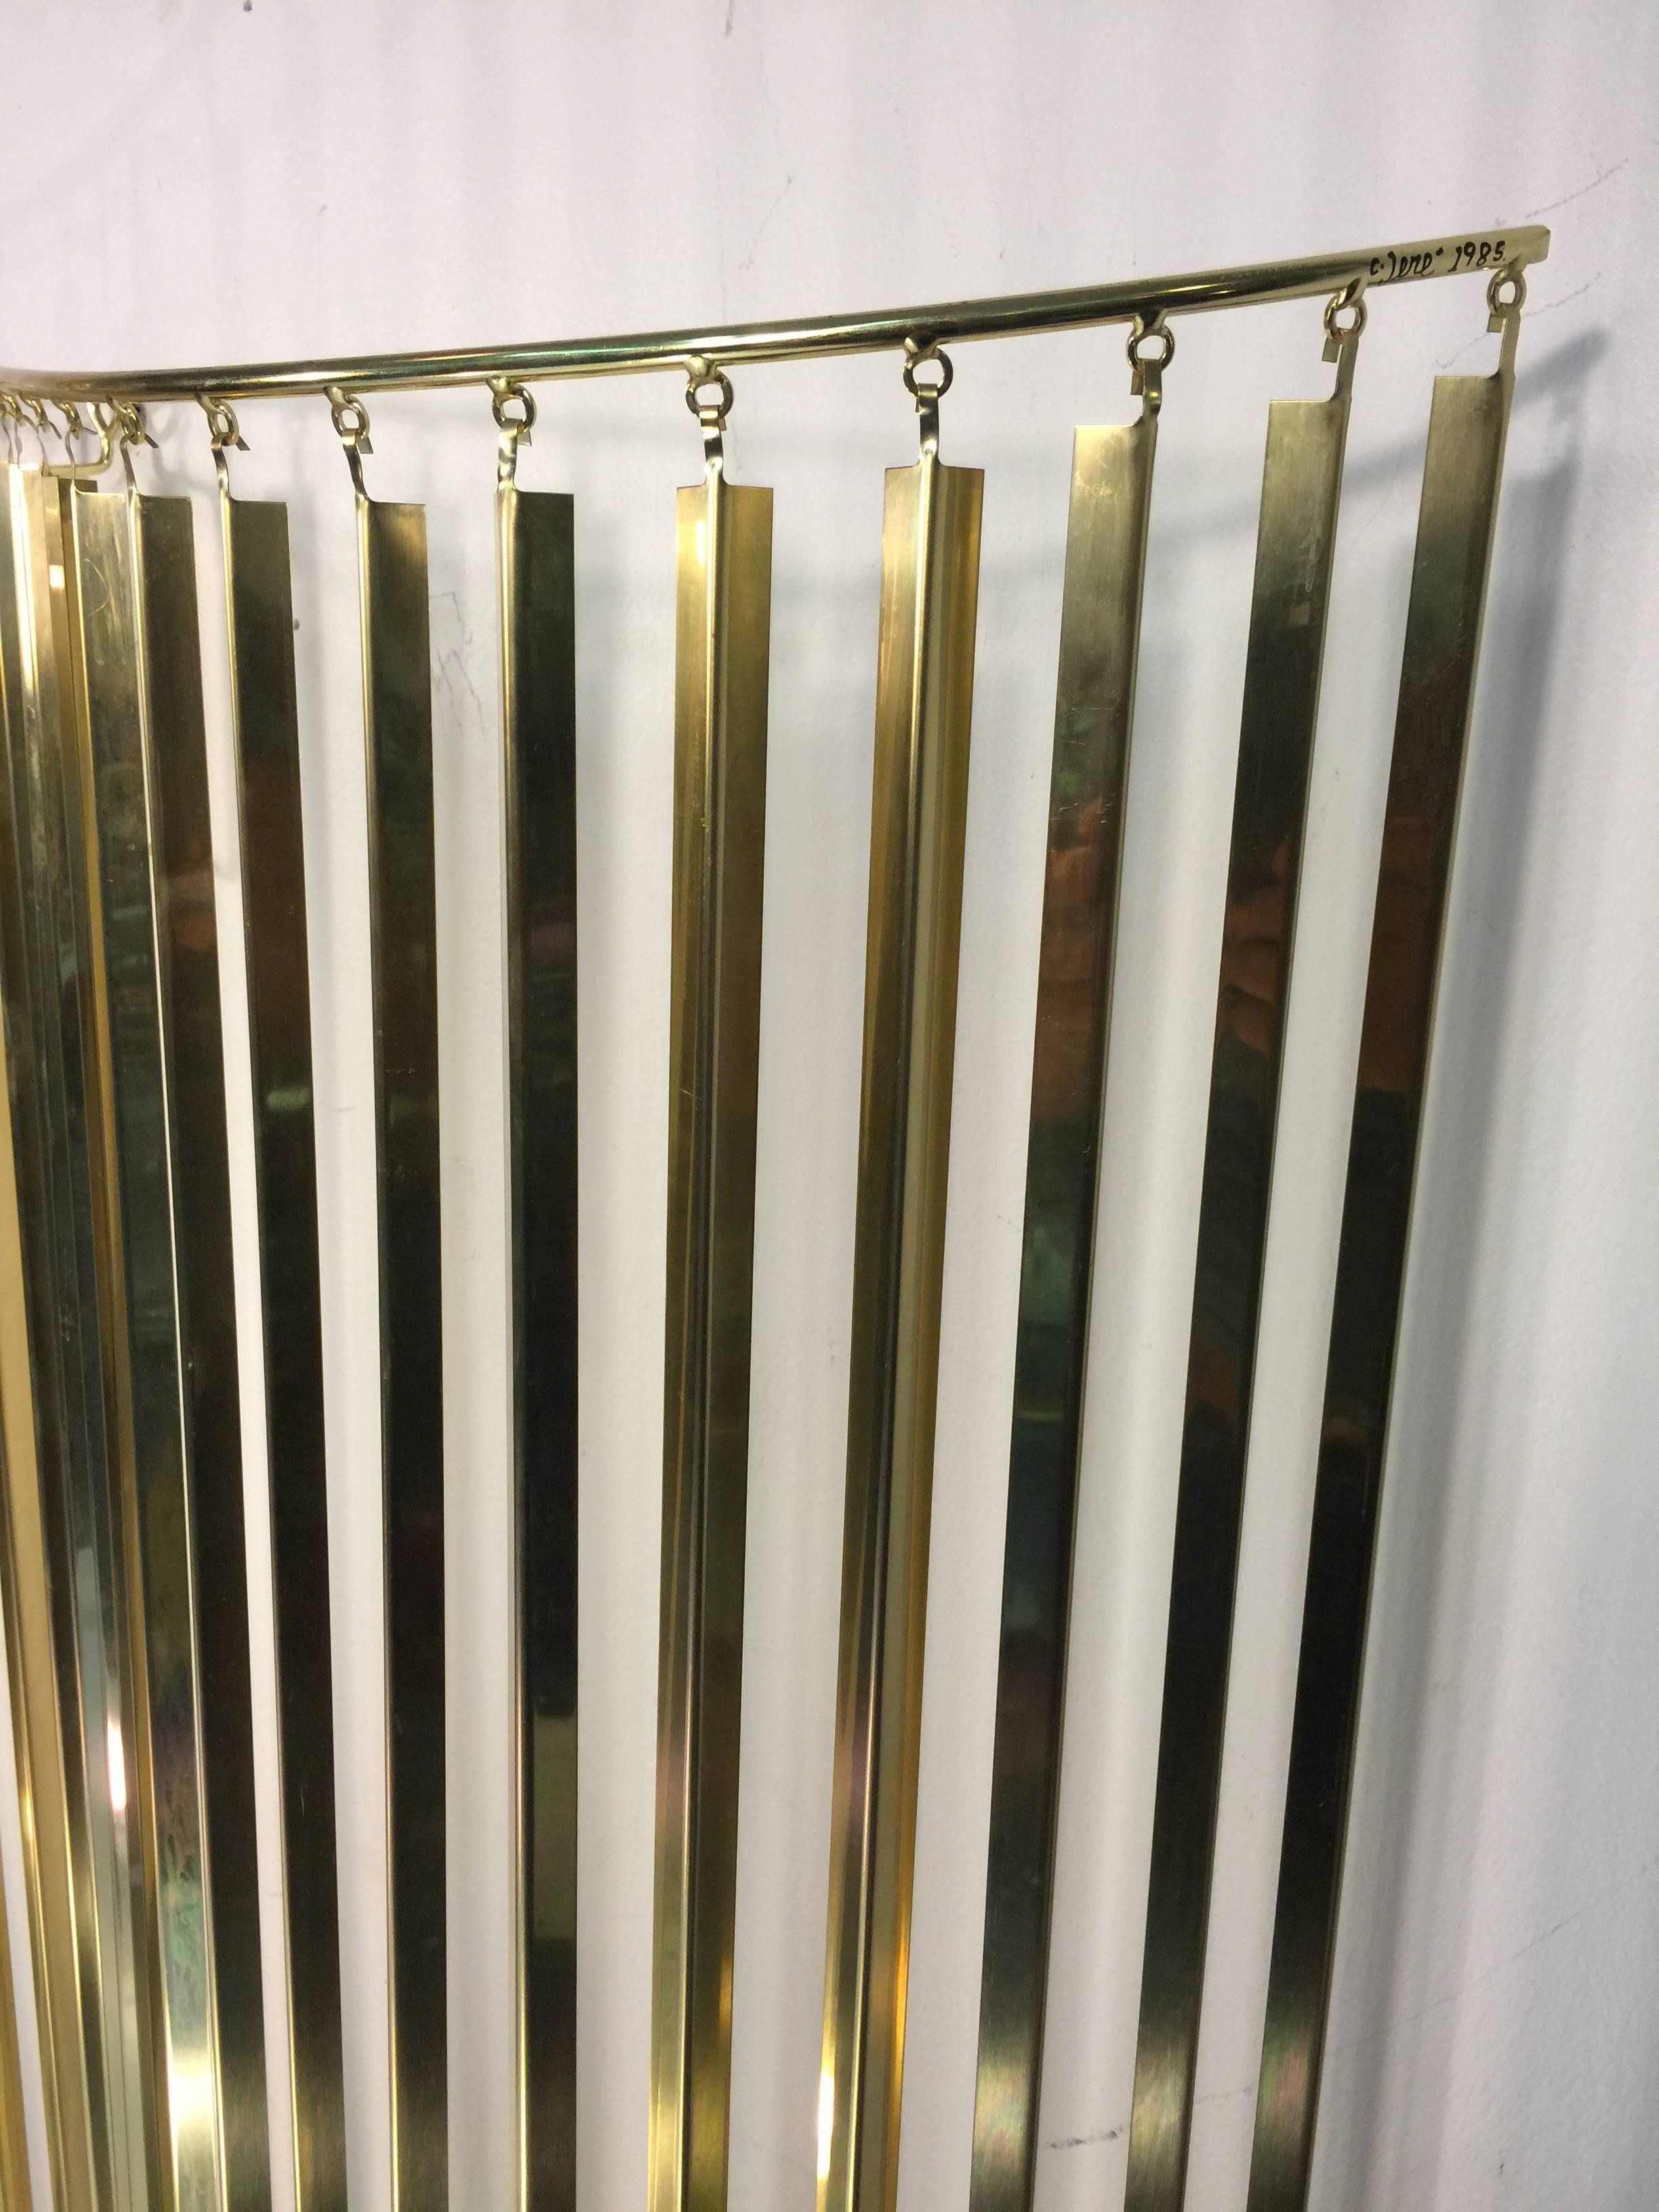 American Wonderful Curtis Jere Kinetic Wave Form Chrome and Brass Wall Sculpture For Sale